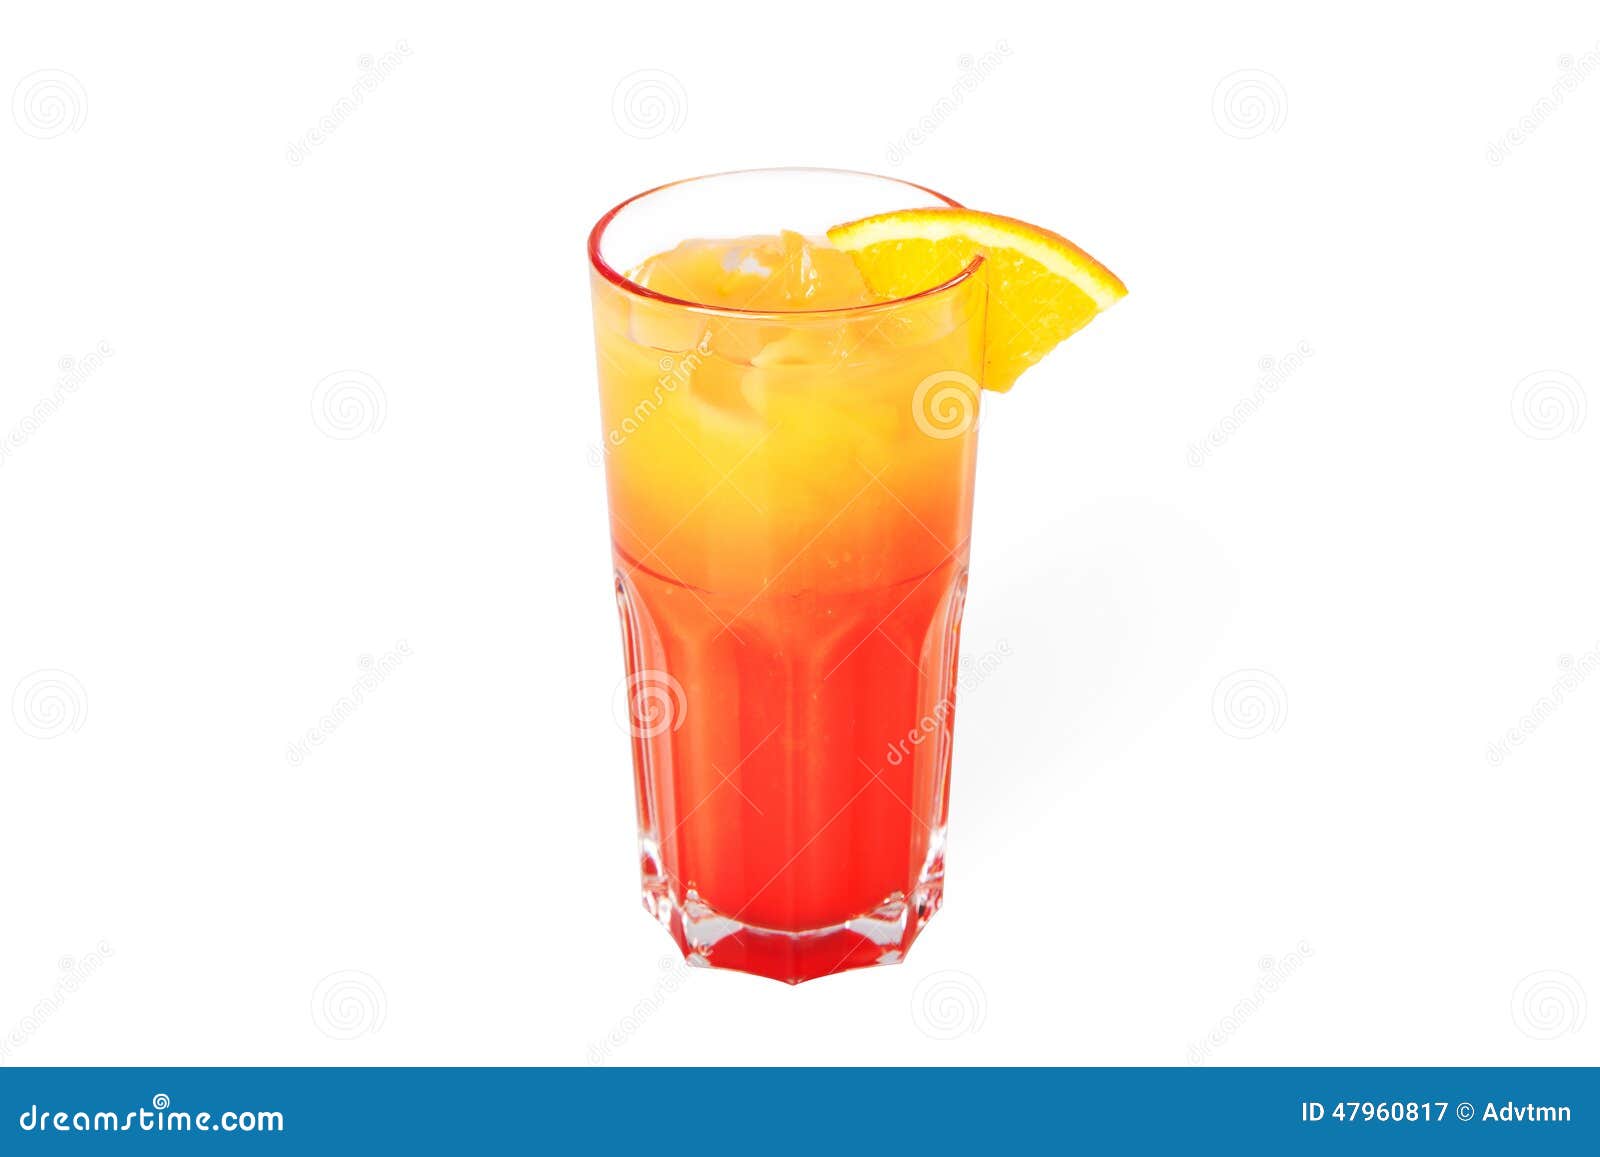 tequila sunrise cocktail with ice